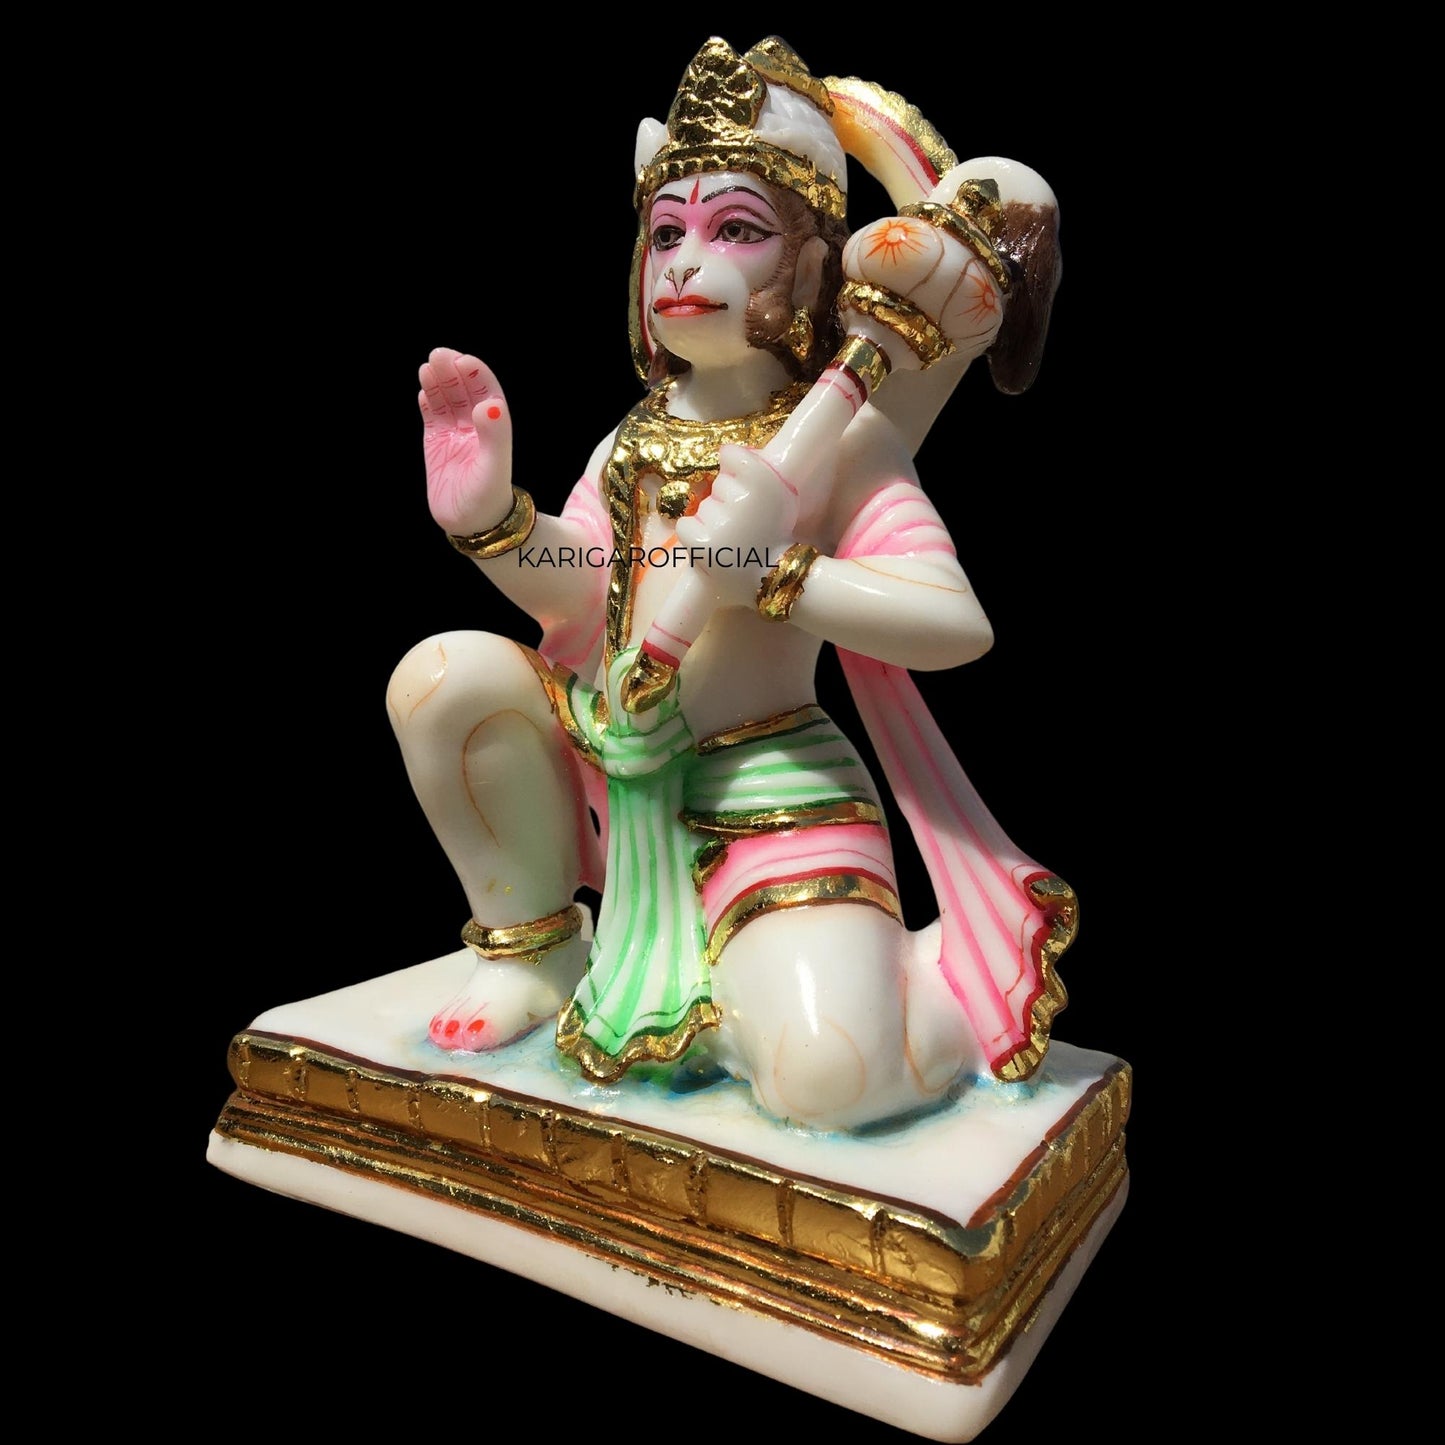 Hanuman Statue, Multicolor 8 inches Hand Painted Marble Blessing Bajrang Bali Figurine, Natural Powerlifter Hindu Monkey god of Devotion, Strength, Bhakti, Perfect for Small Home Temple Decoration